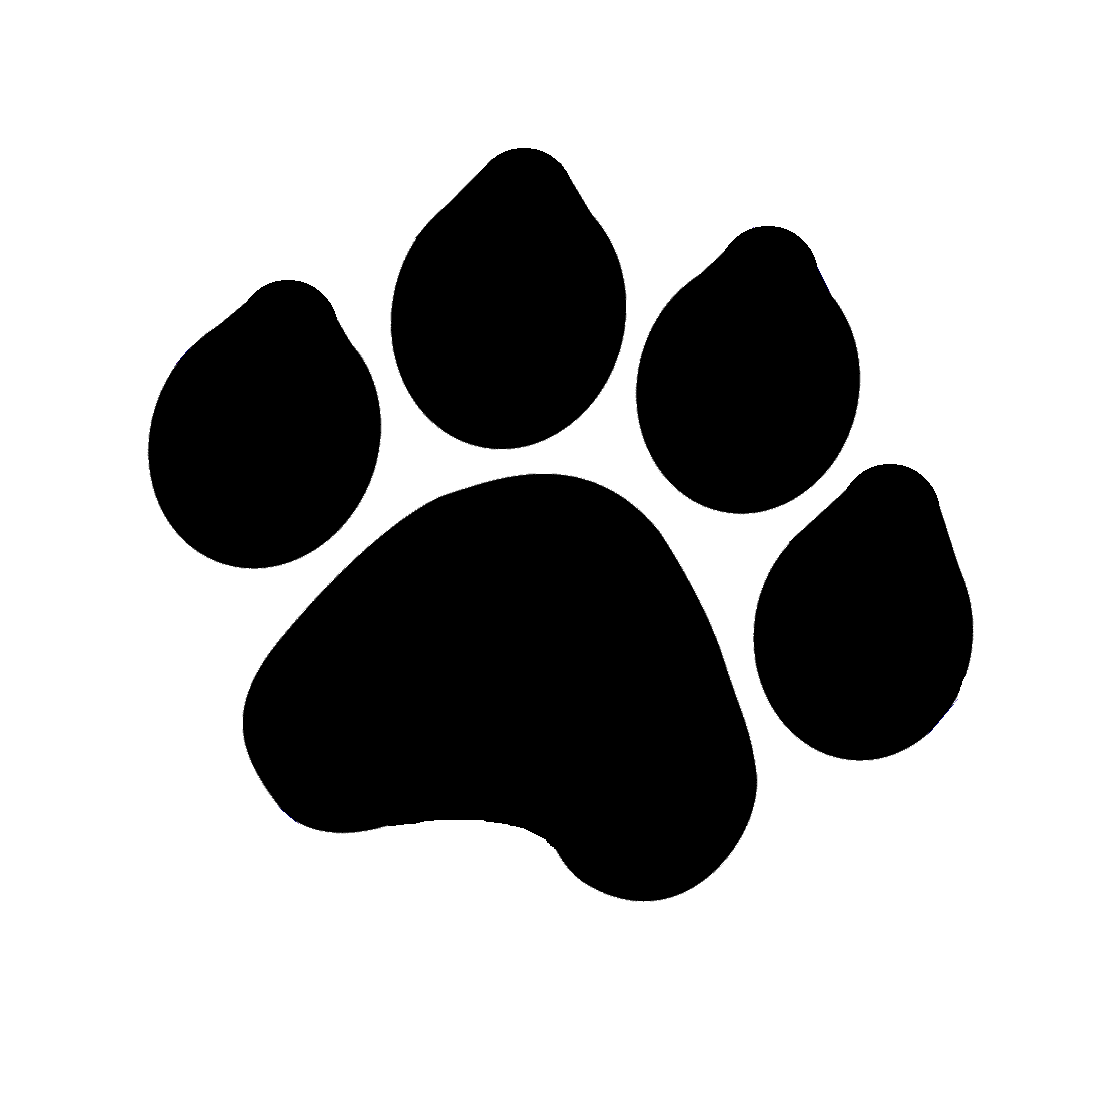 21 Tiger Paw Prints Clip Art Free Cliparts That You Can Download To